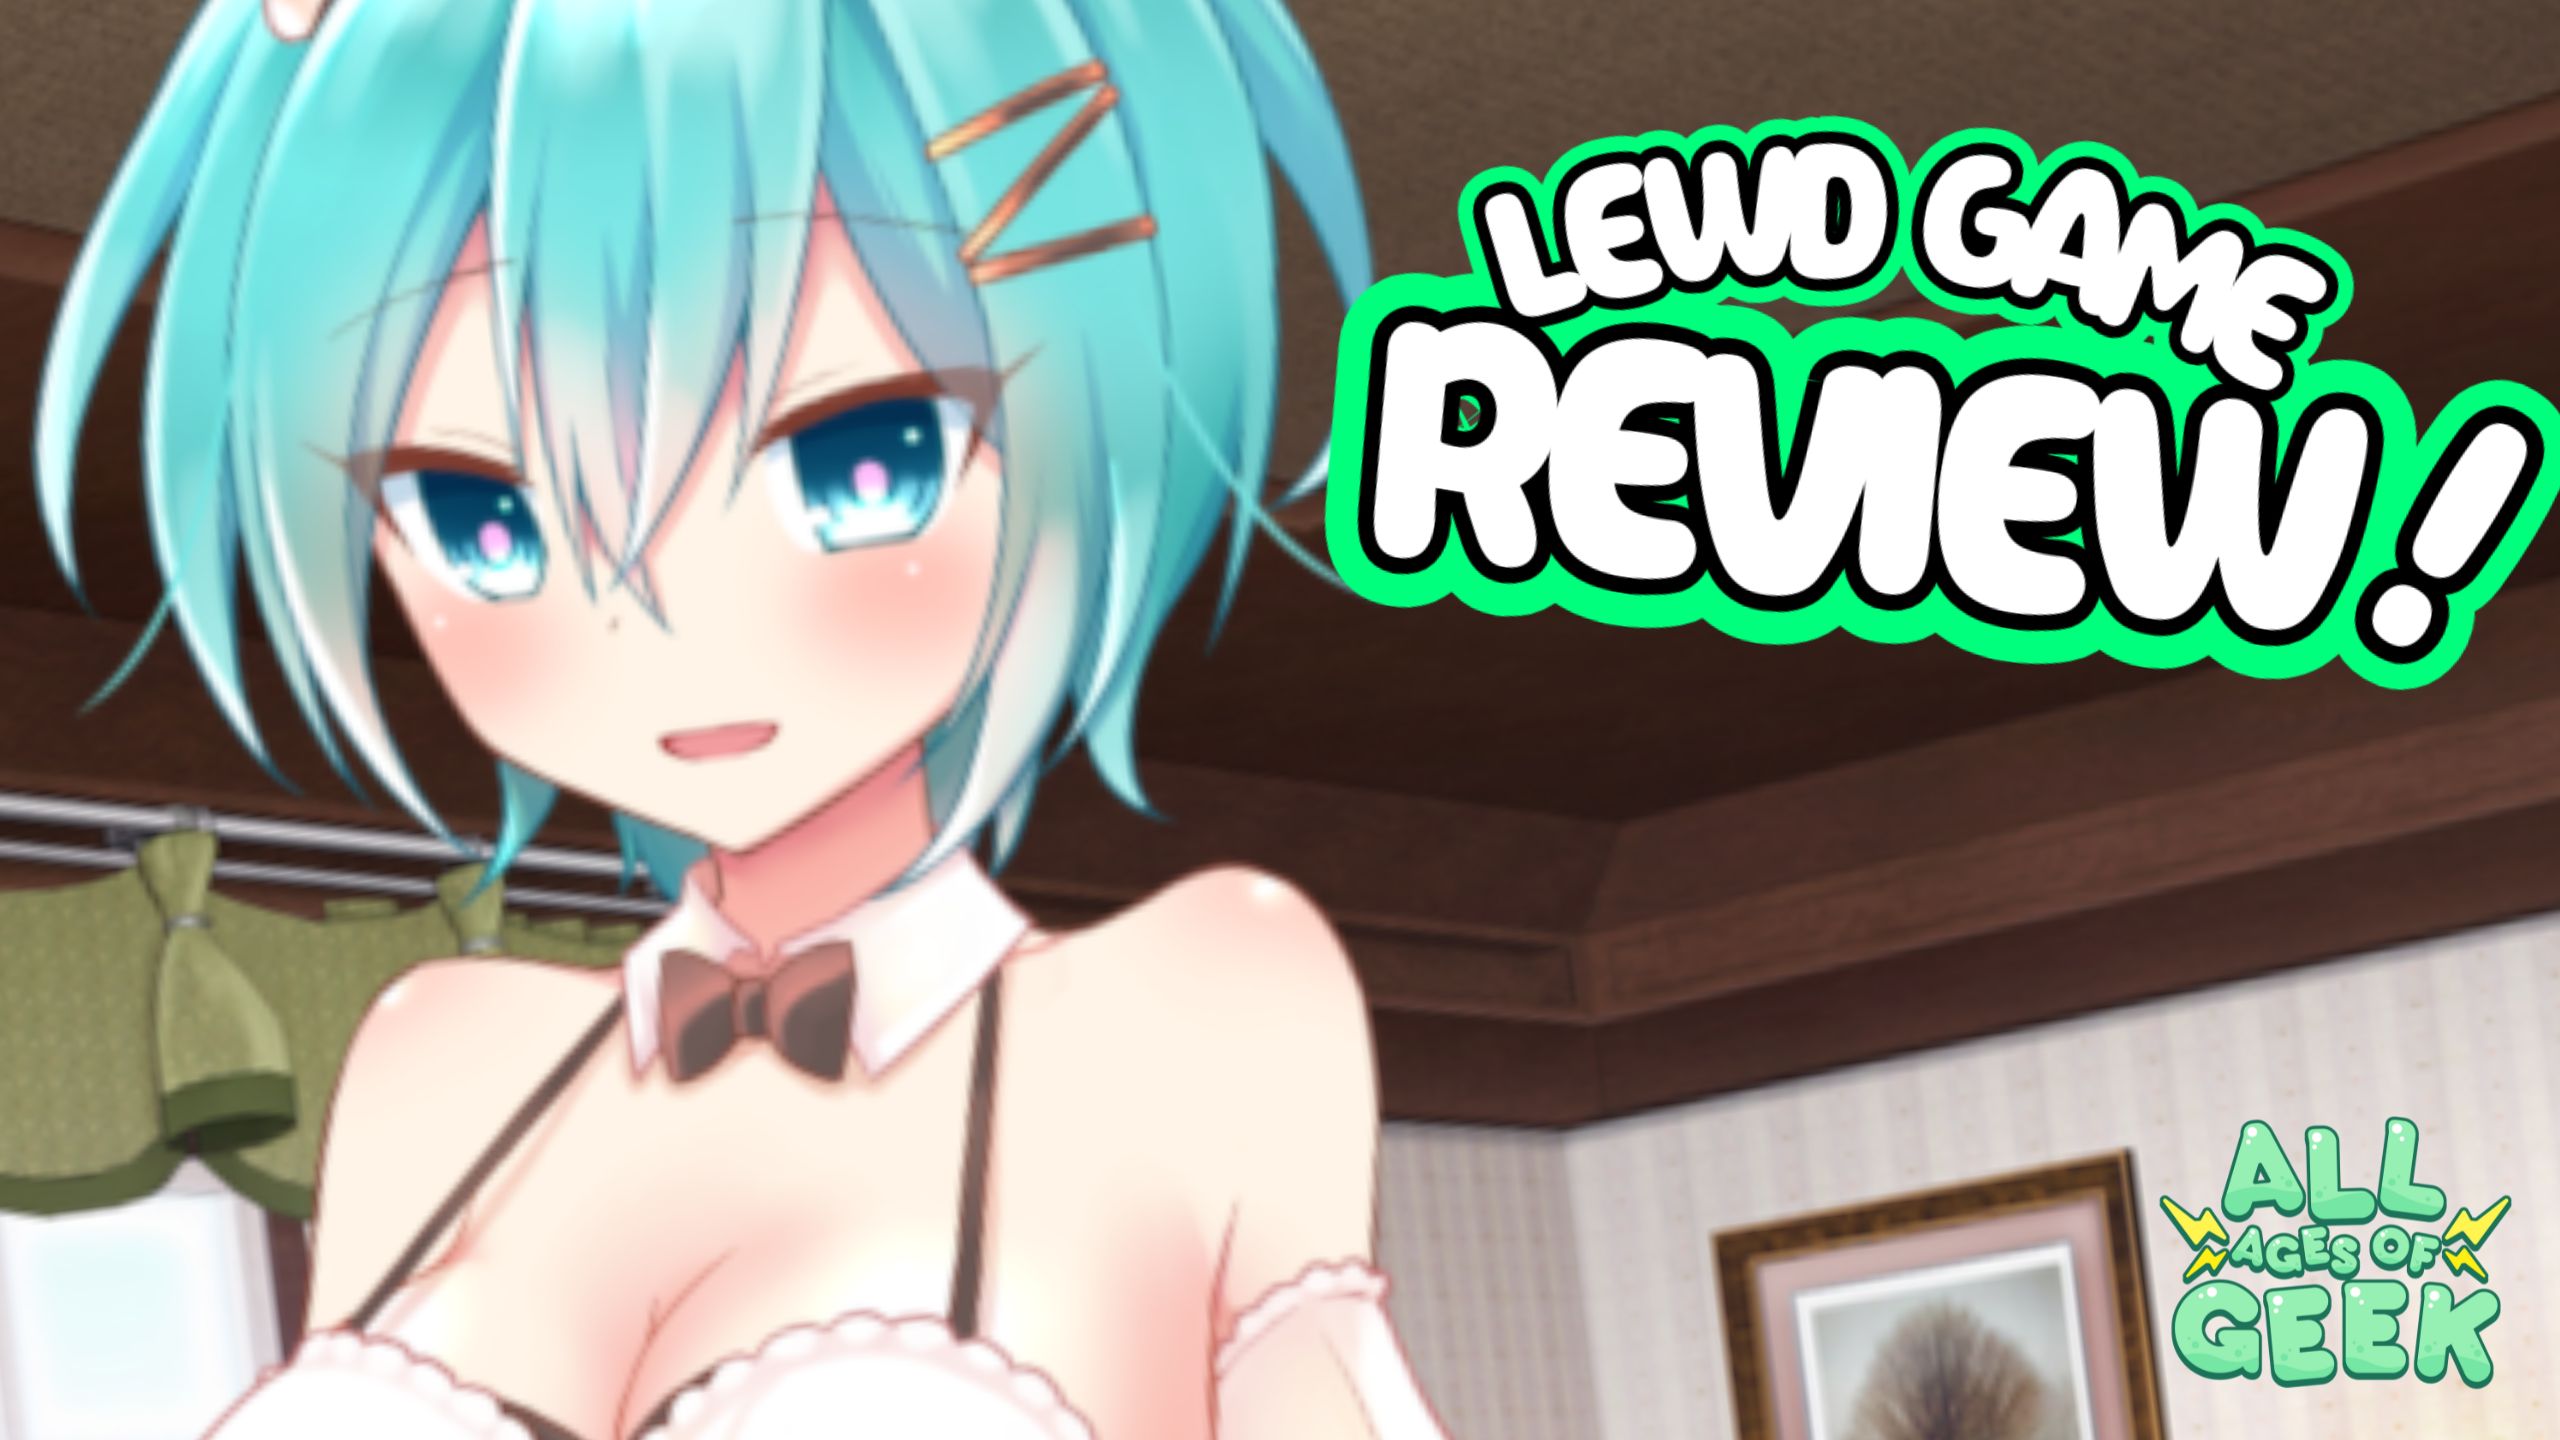 Who is the New Maid? – Lewd Game Review